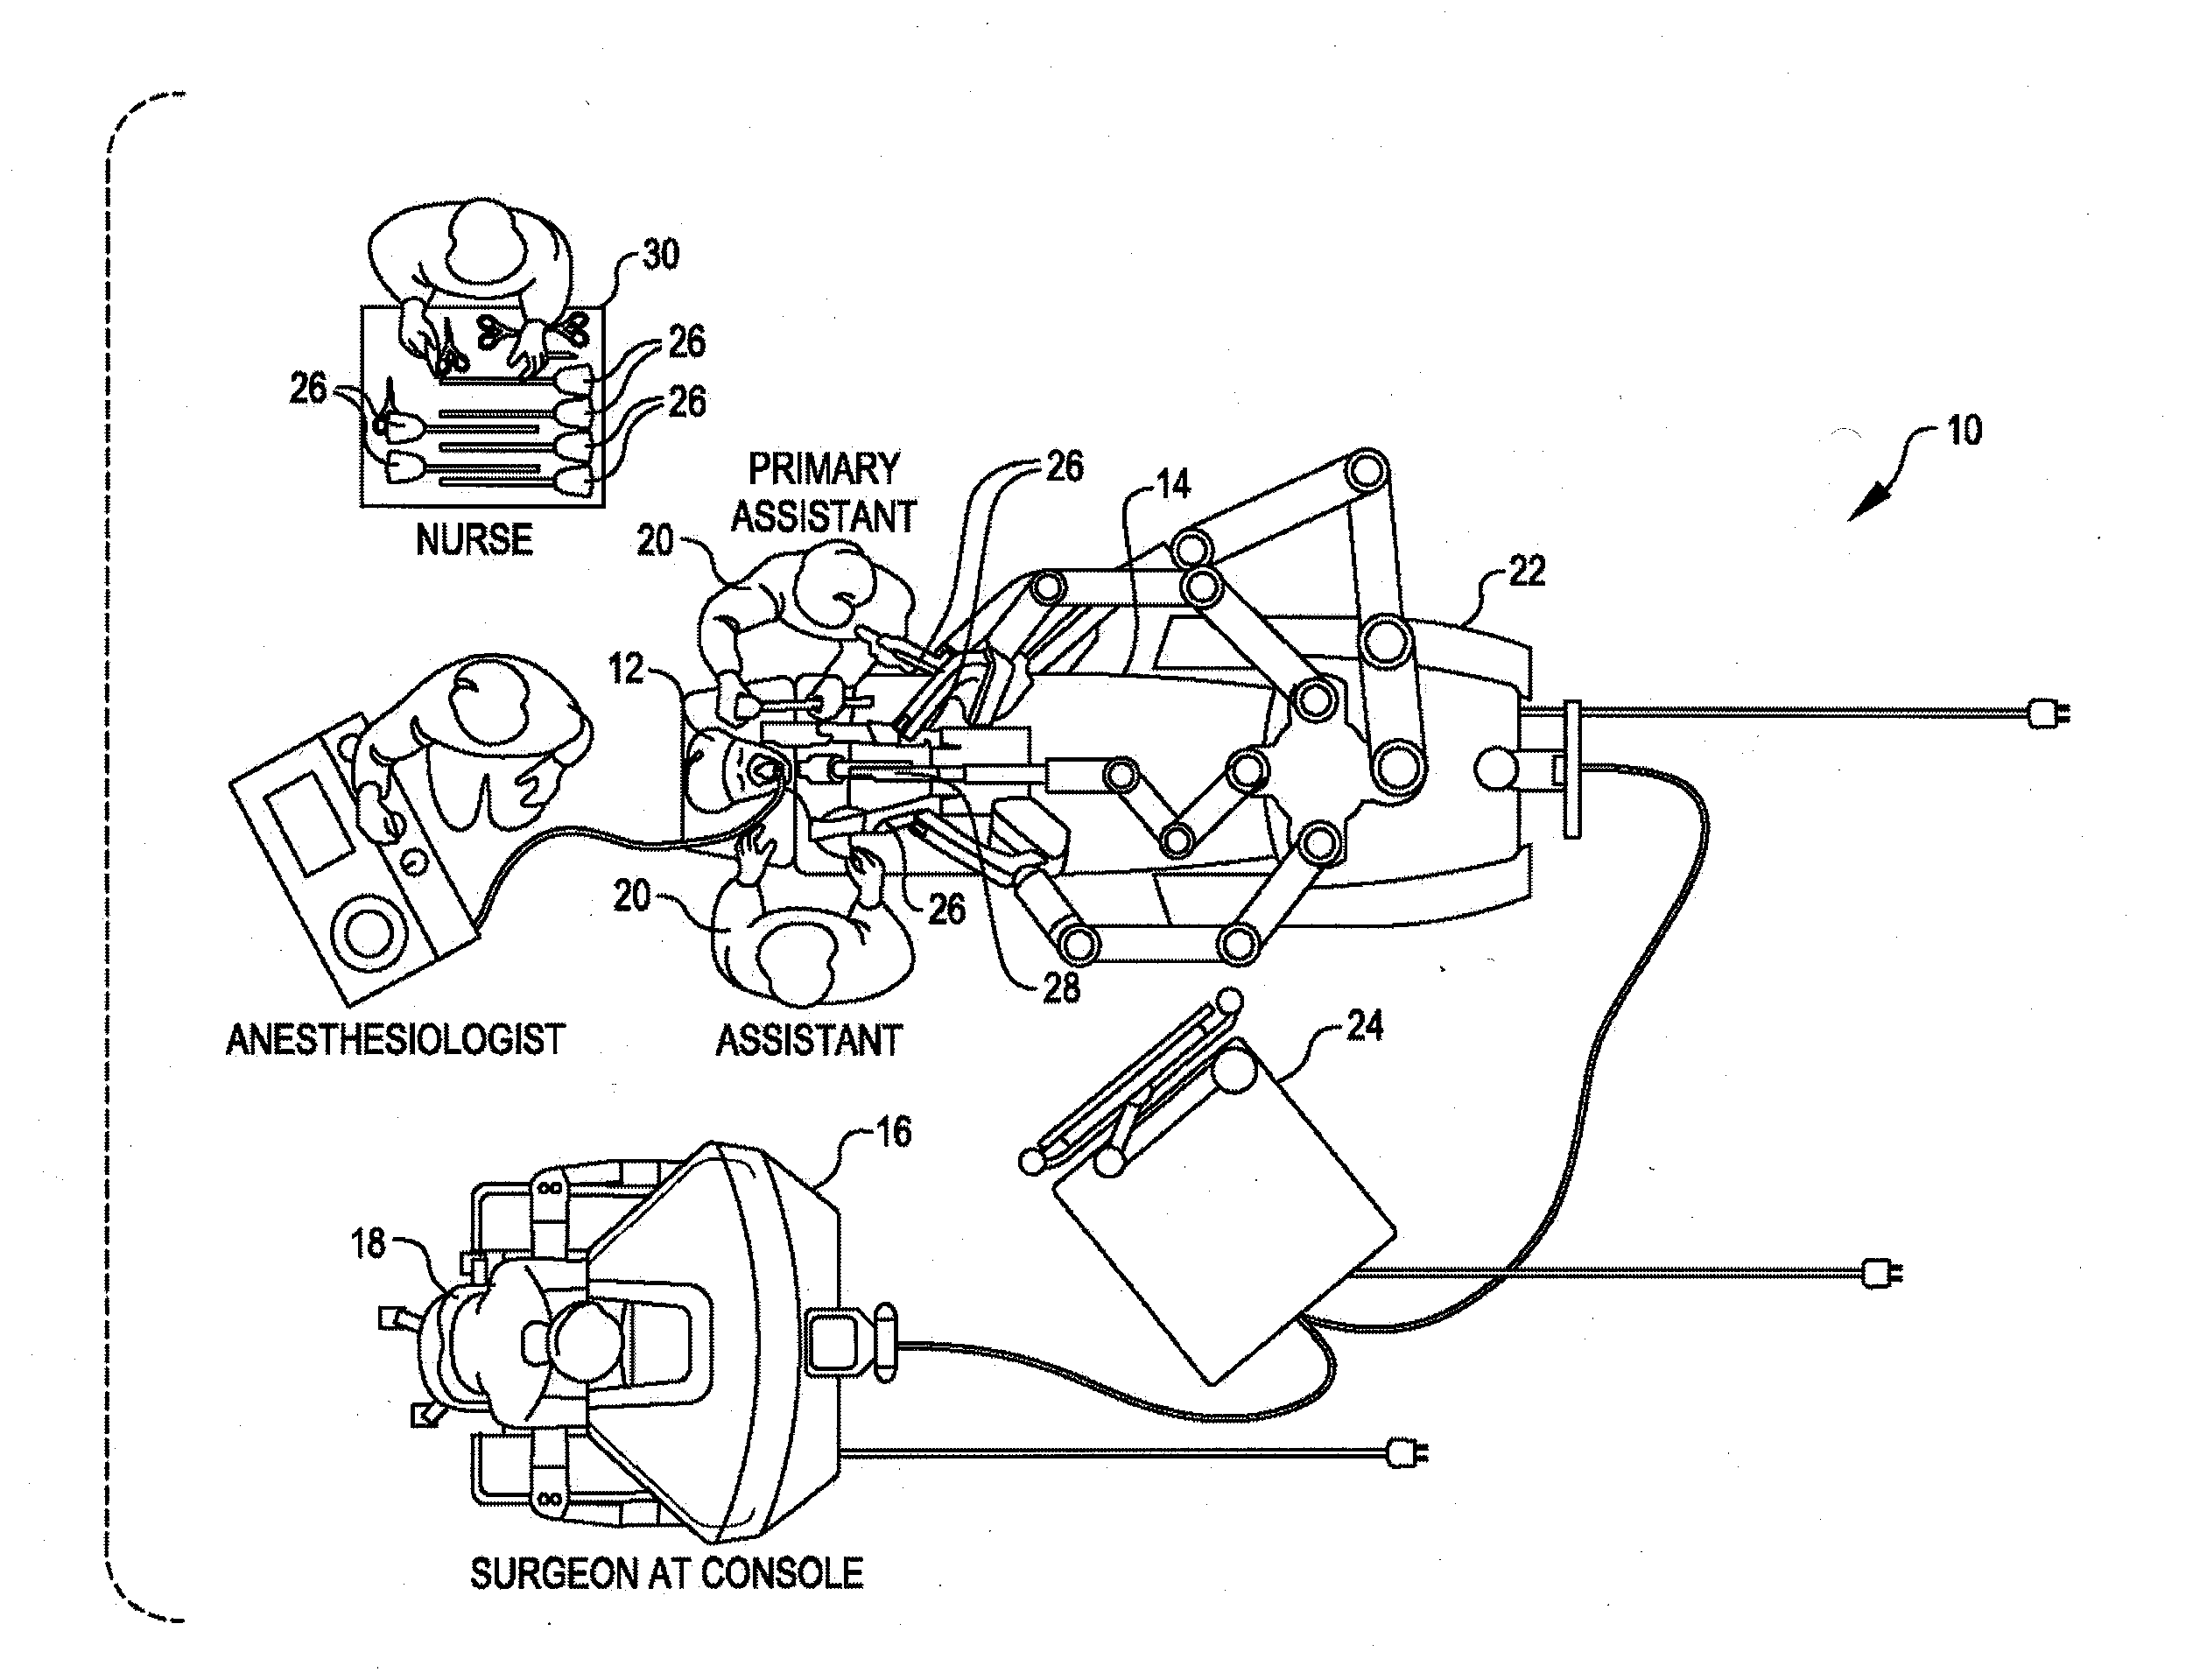 Instrument carriage assembly for surgical system